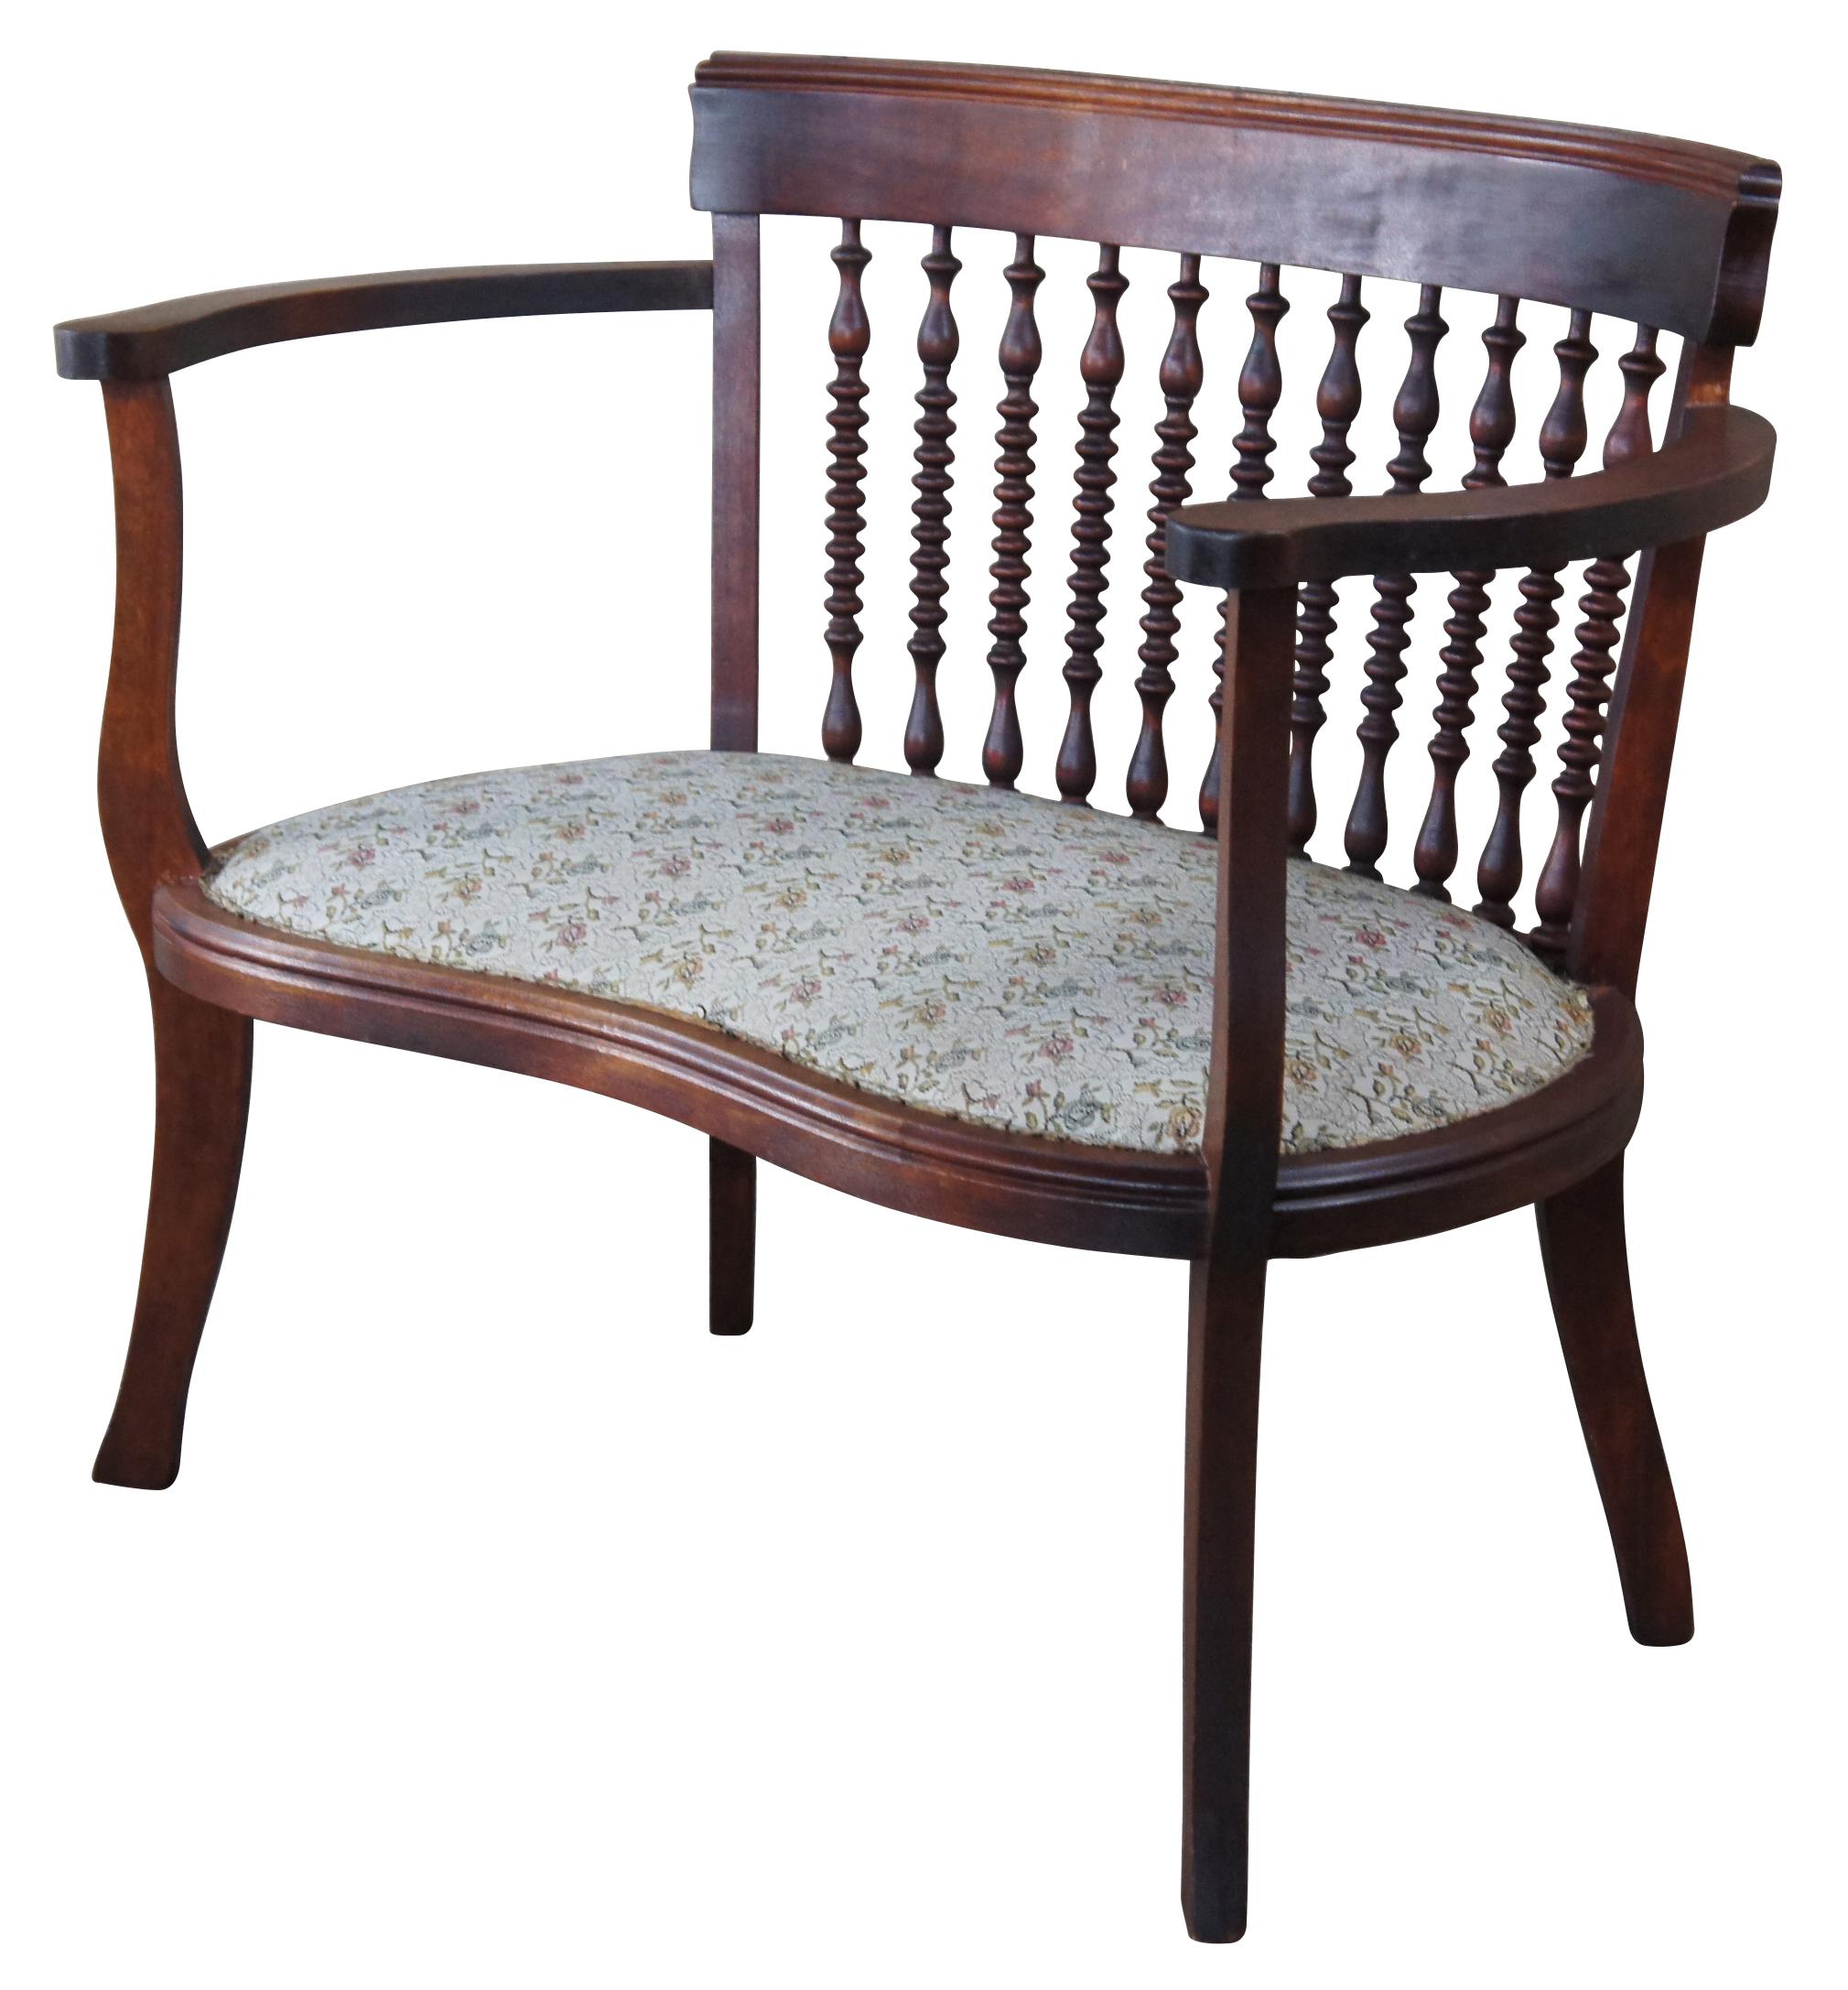 A lovely early 1900s Edwardian kidney shaped settee. Made from mahogany with a barrel back, turned spindles and a floral upholstered seat. Its quaint size makes it perfect for a parlor, library or sun room.